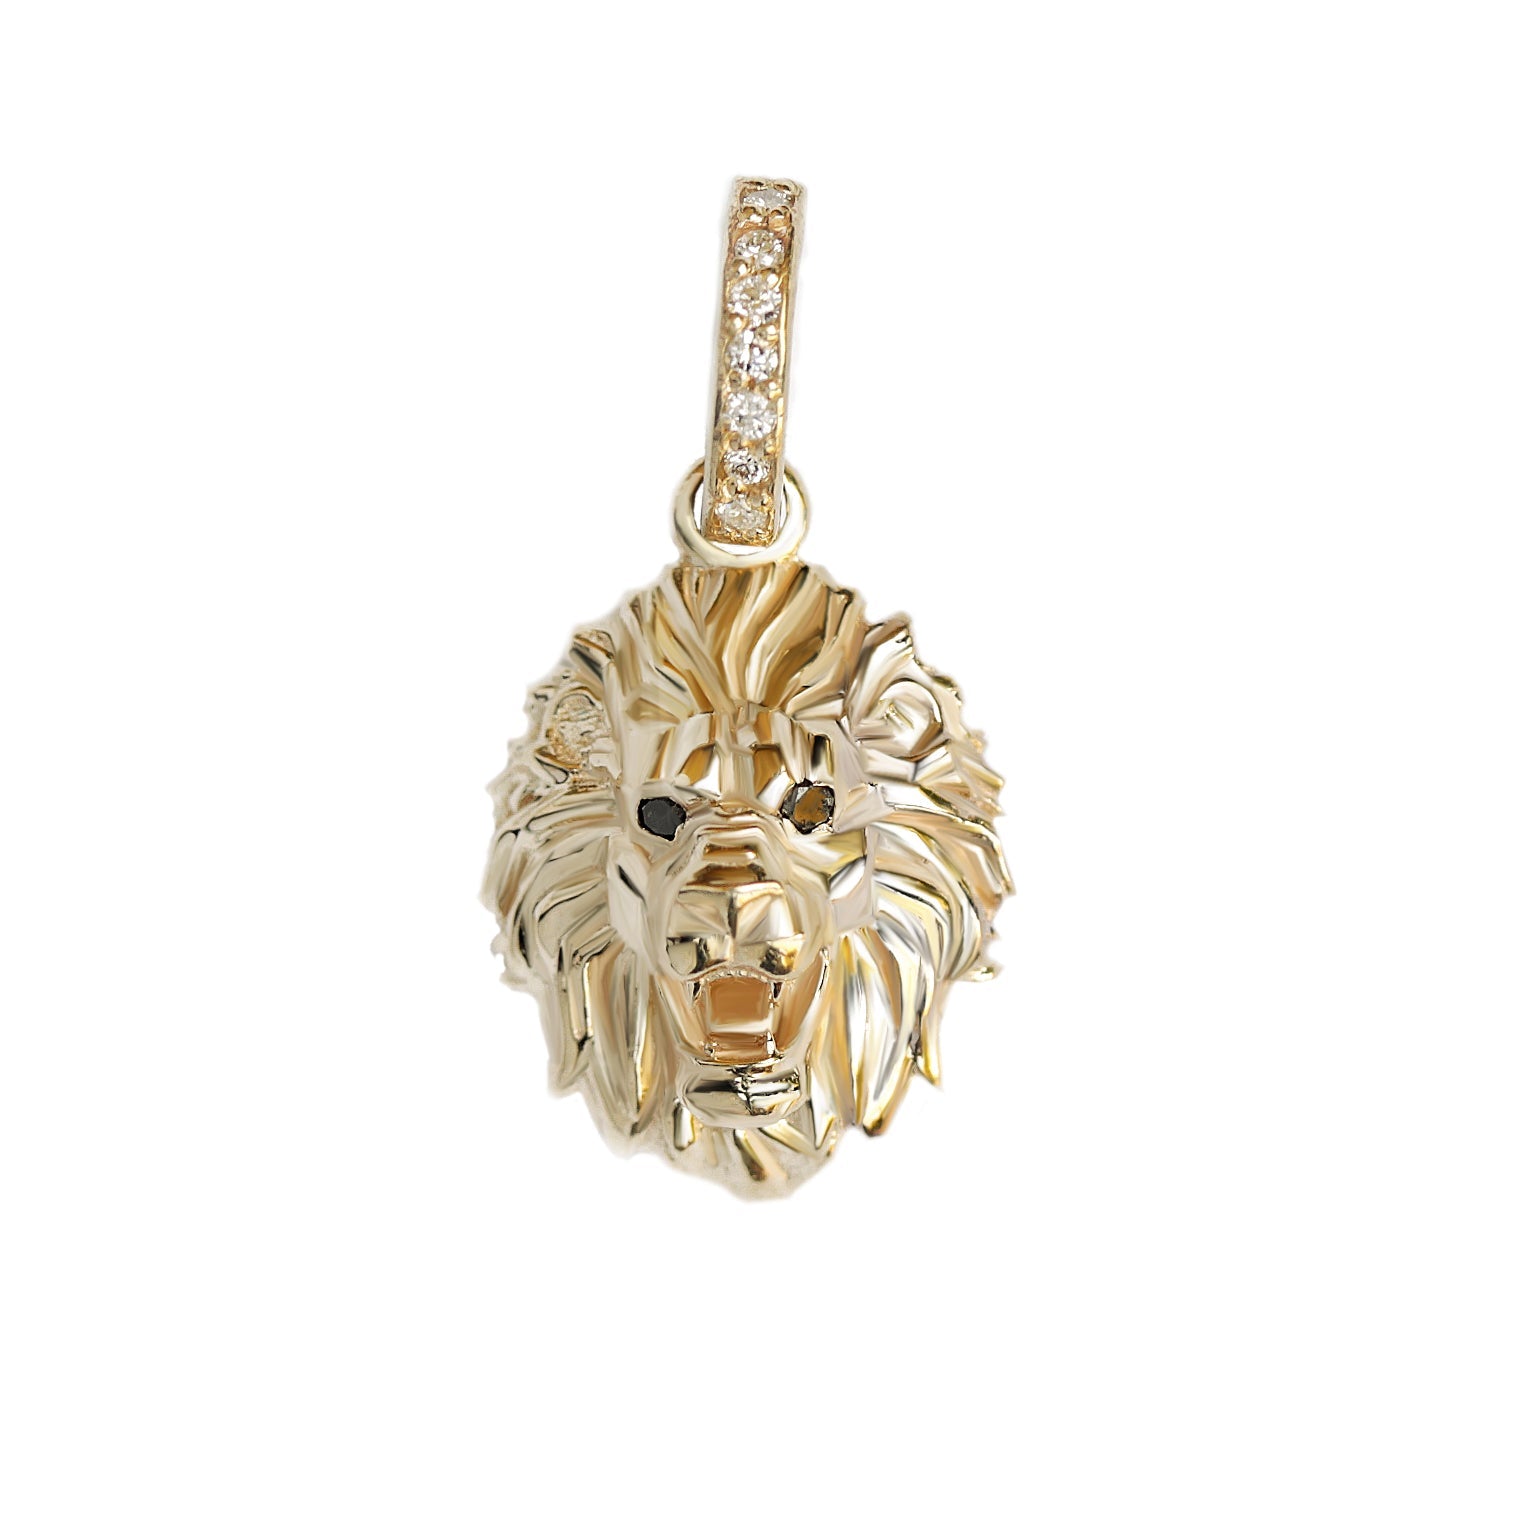 Gold Lion Head Charm, Astrology sign Pendant with Diamond Hoop